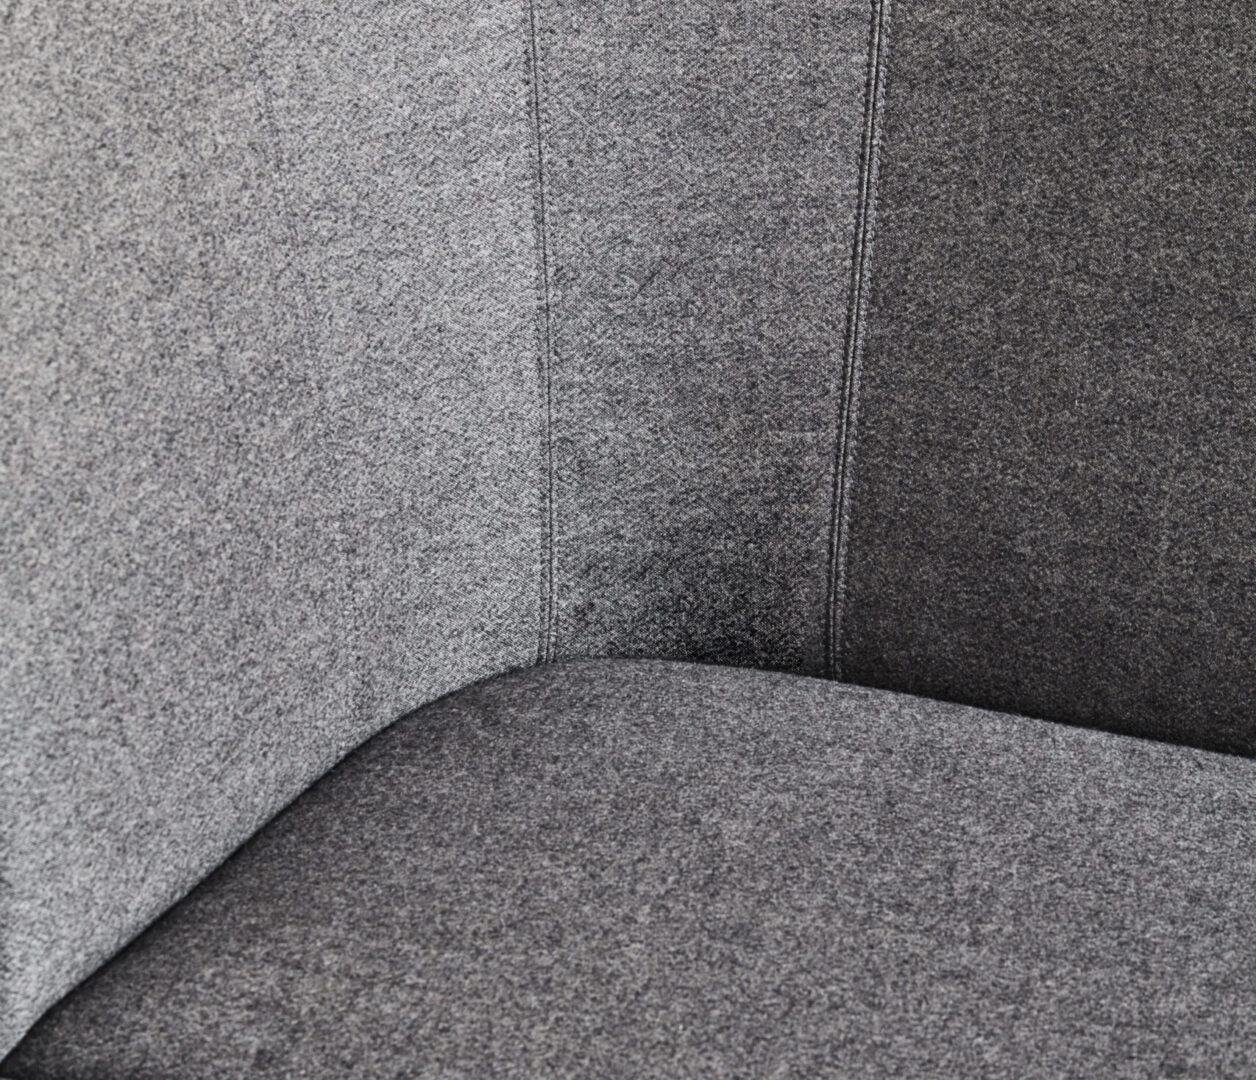 OCEE&FOUR – Soft Seating – FourLikes Sofa – Details Image 4